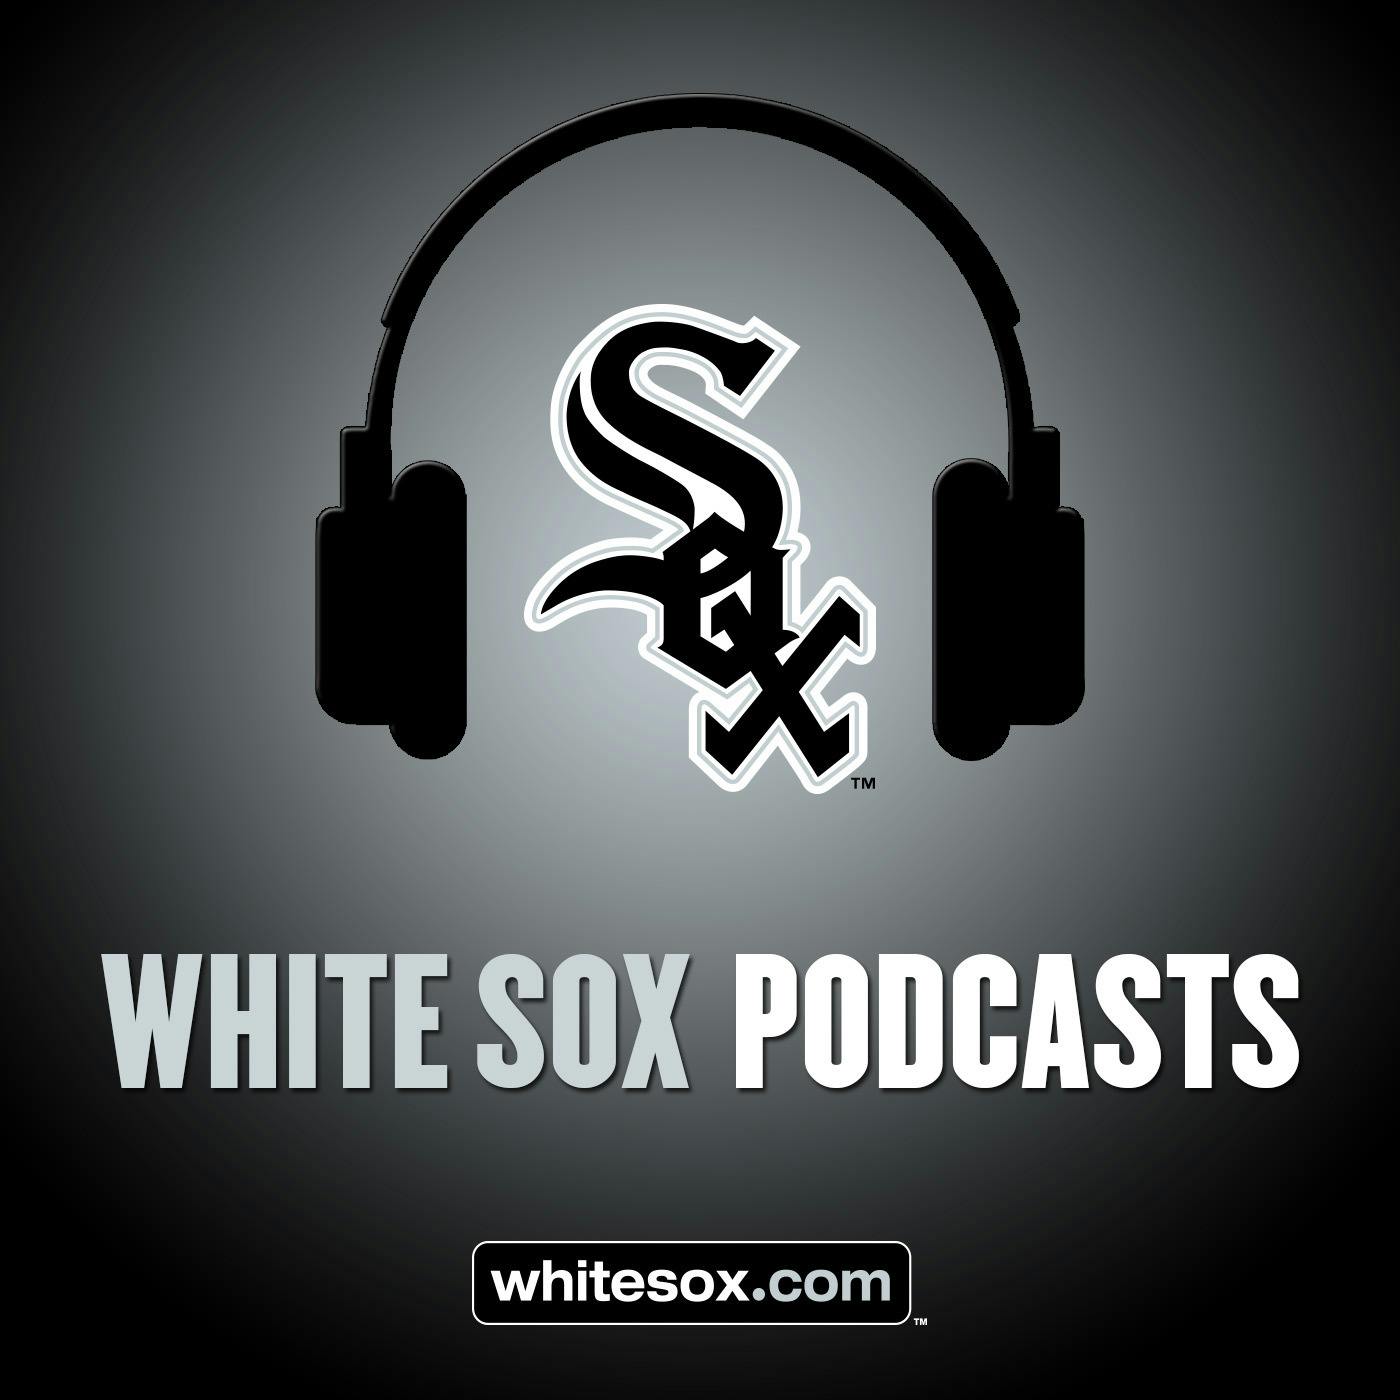 7/6/19: White Sox Weekly